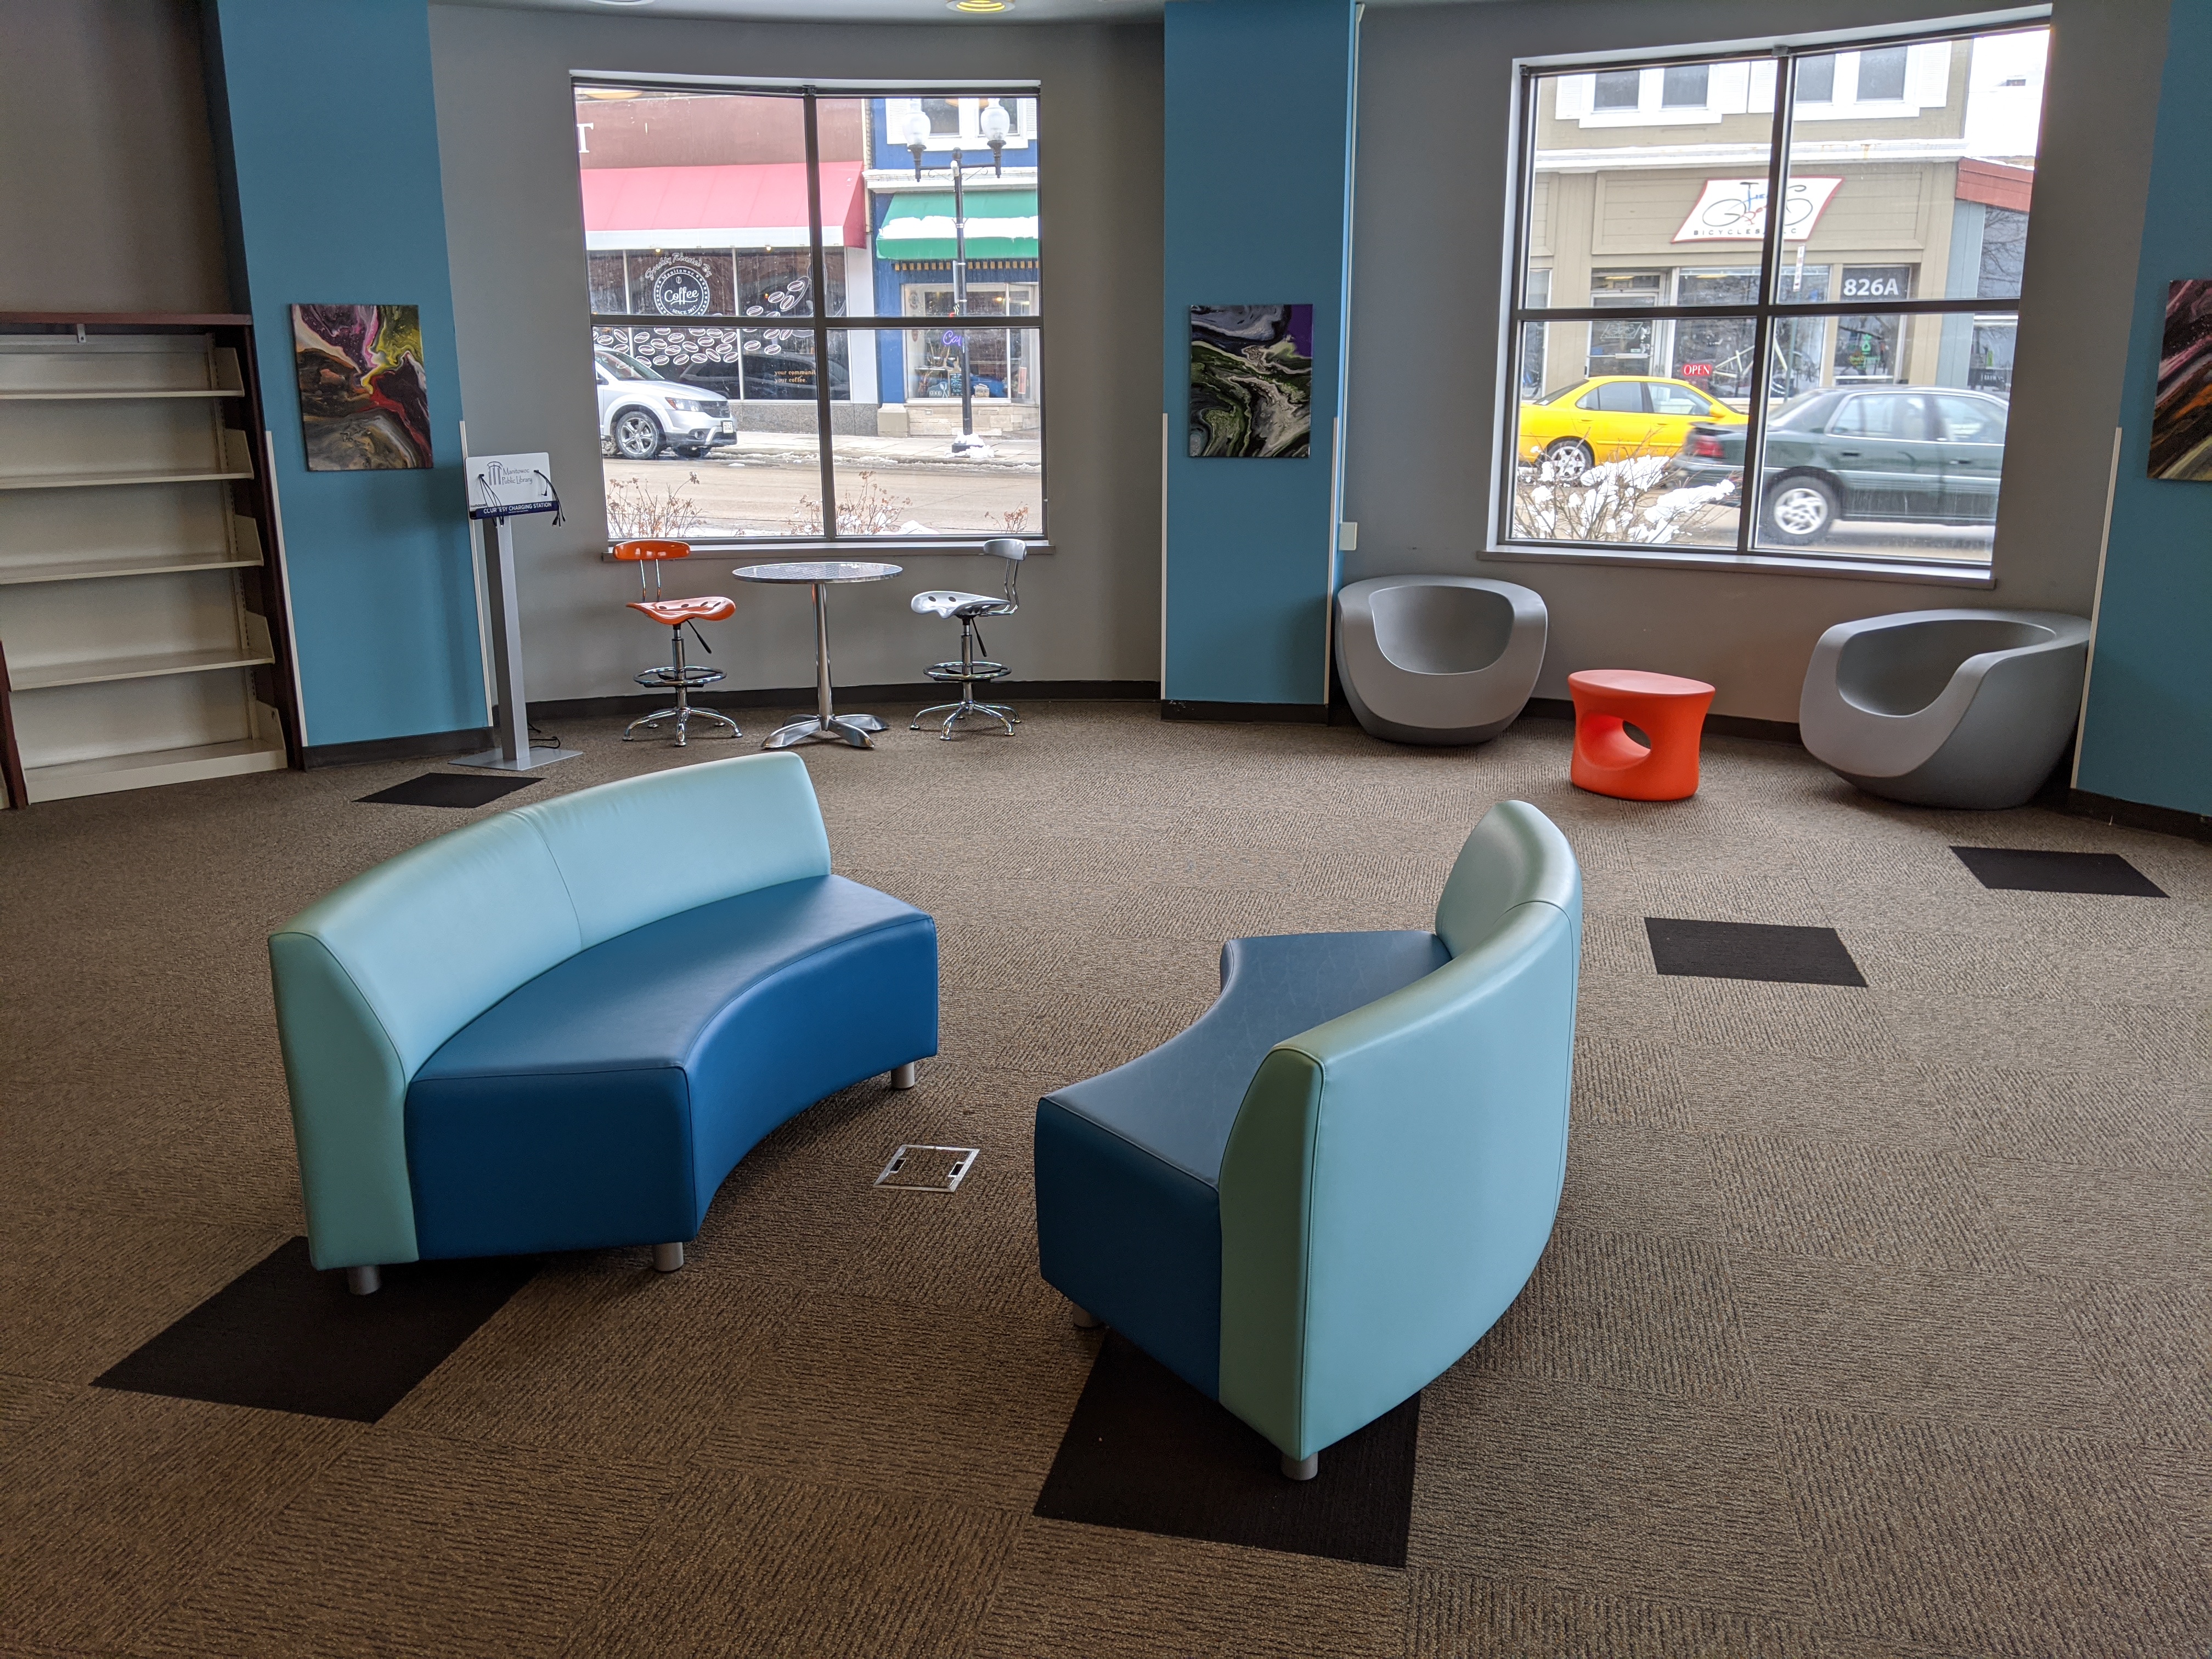 Blue couch sections in teen space